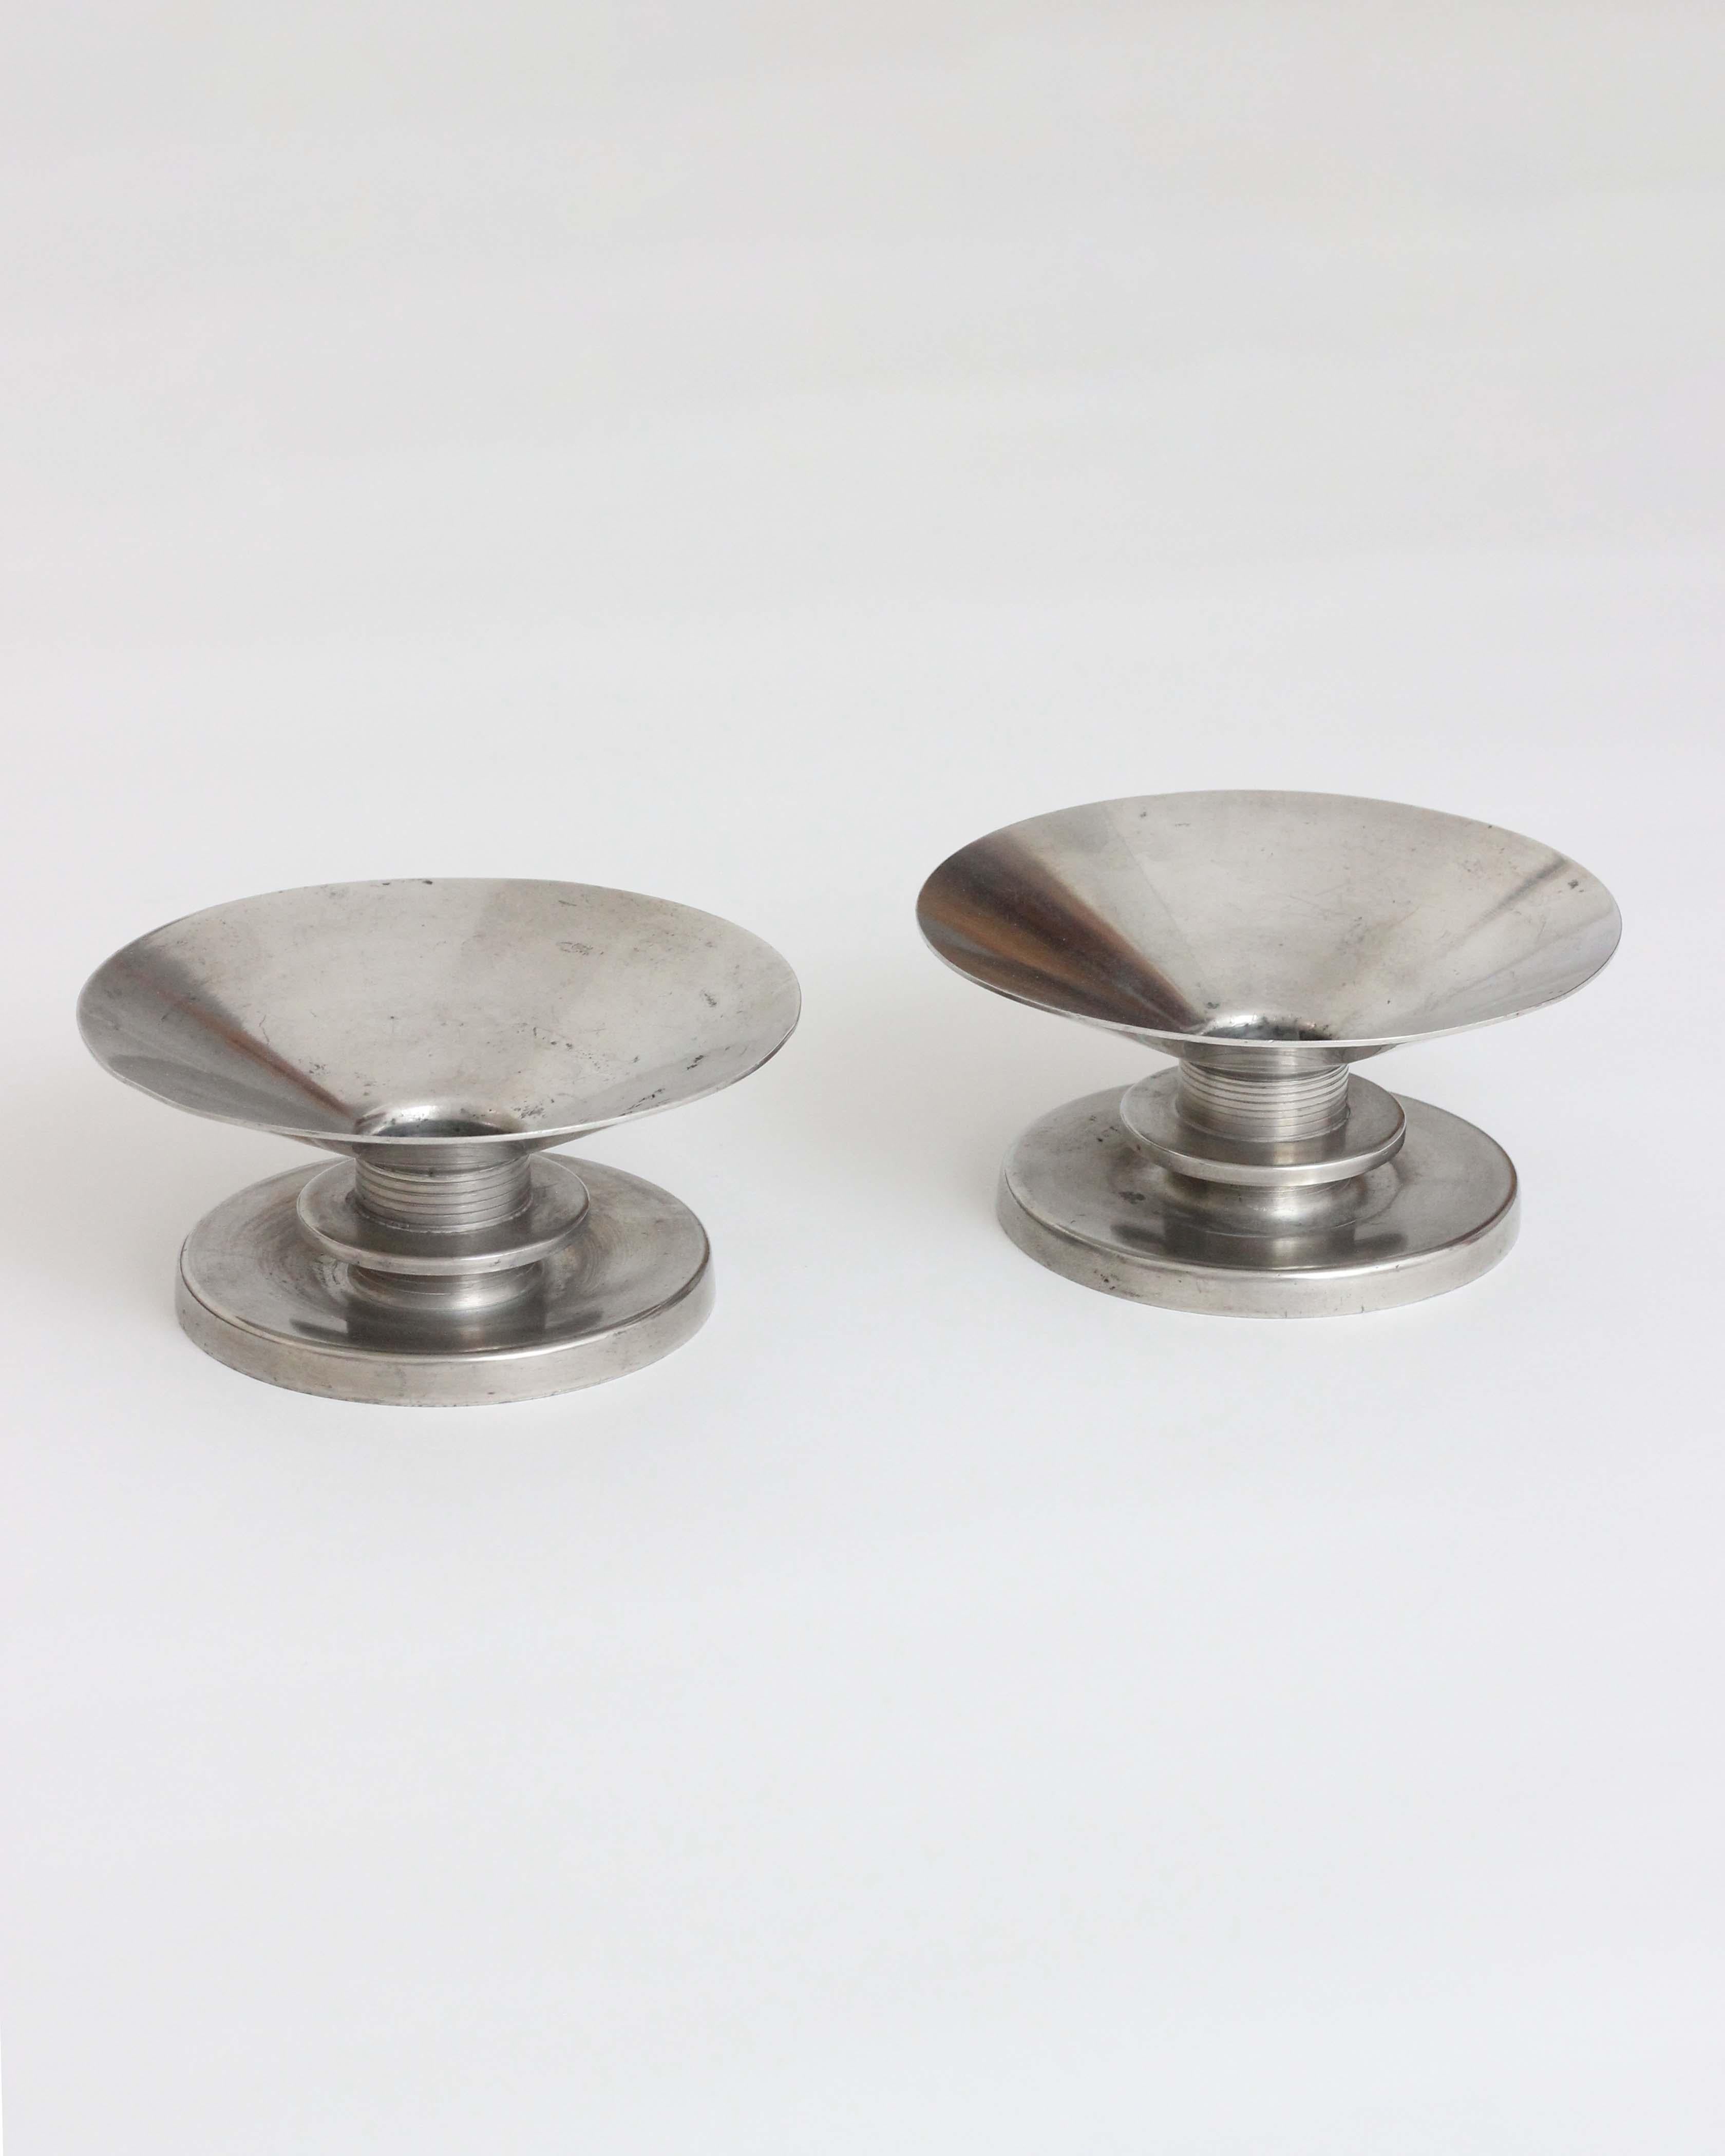 Sylvia Stave 

Candlesticks in pewter showcasing a round foot adorned with stylish stripes and an intricately tied knot. Its cuffs gracefully expand in an upward direction, resembling a cone-like shape.

From 1931 to 1939, Sylvia Stave held the